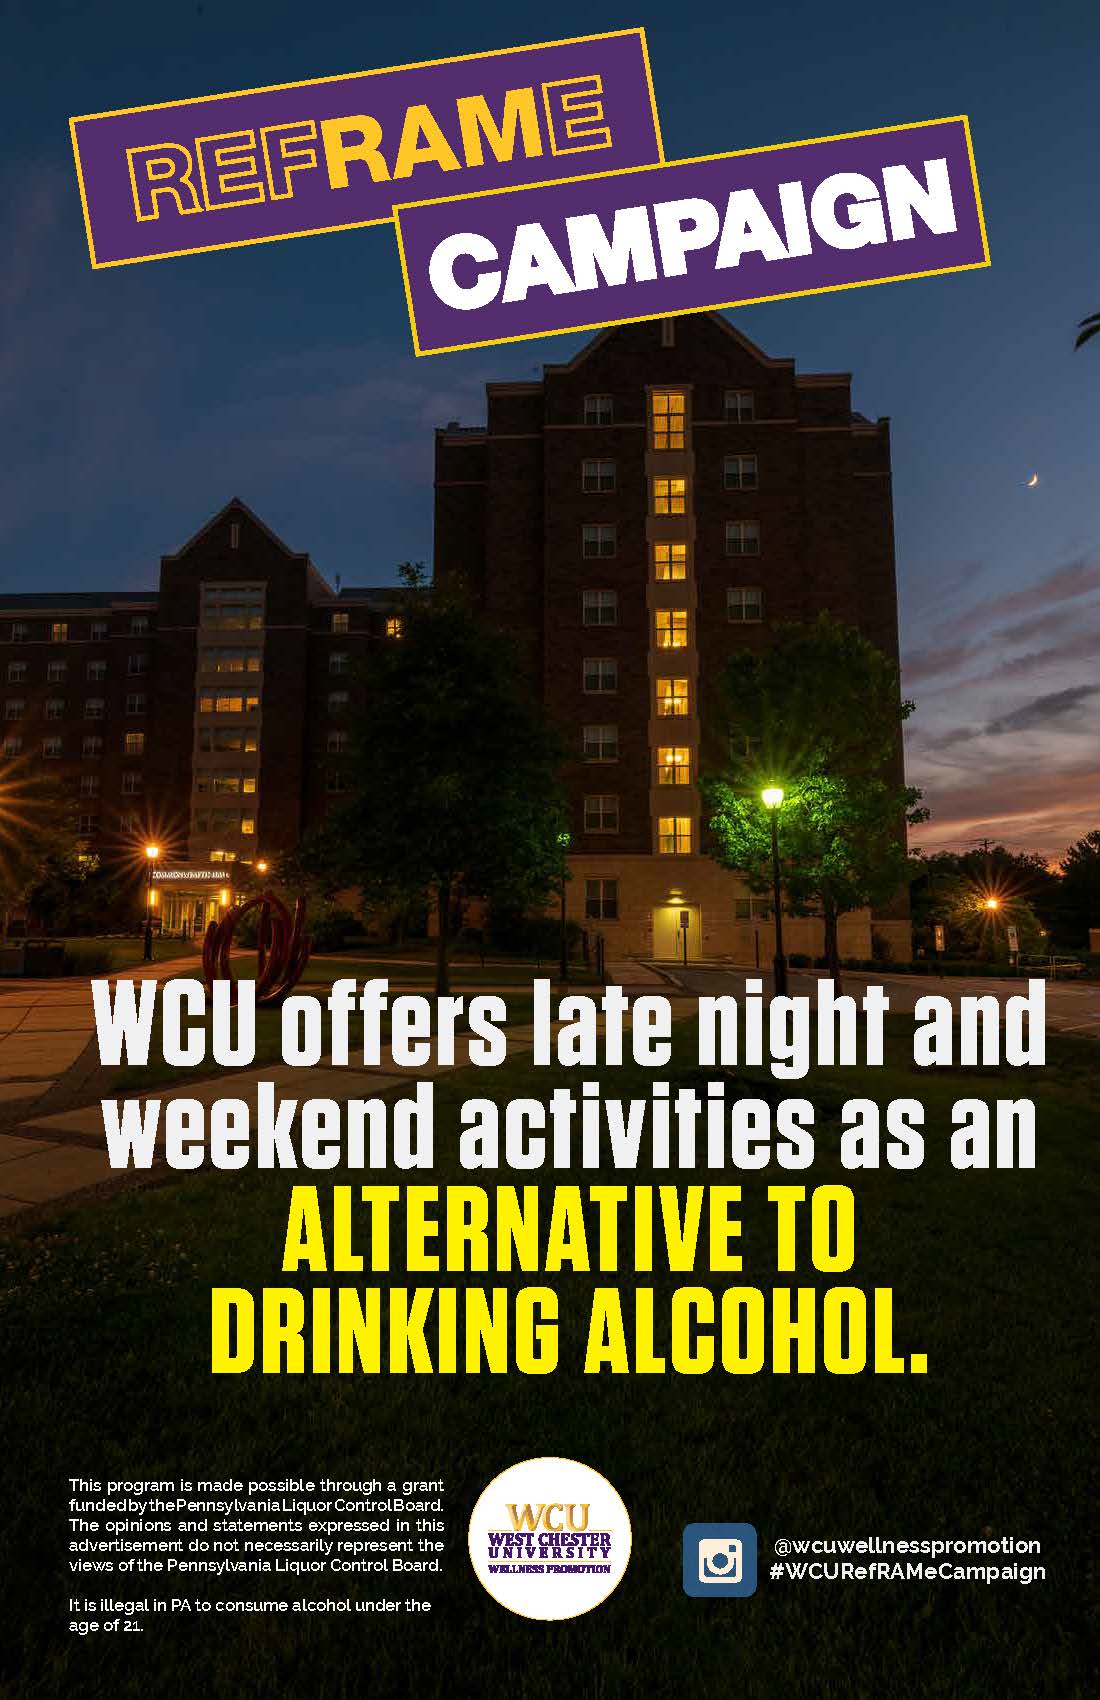 WCU offers late night and weekend activities as an alternative to drinking alcohol.